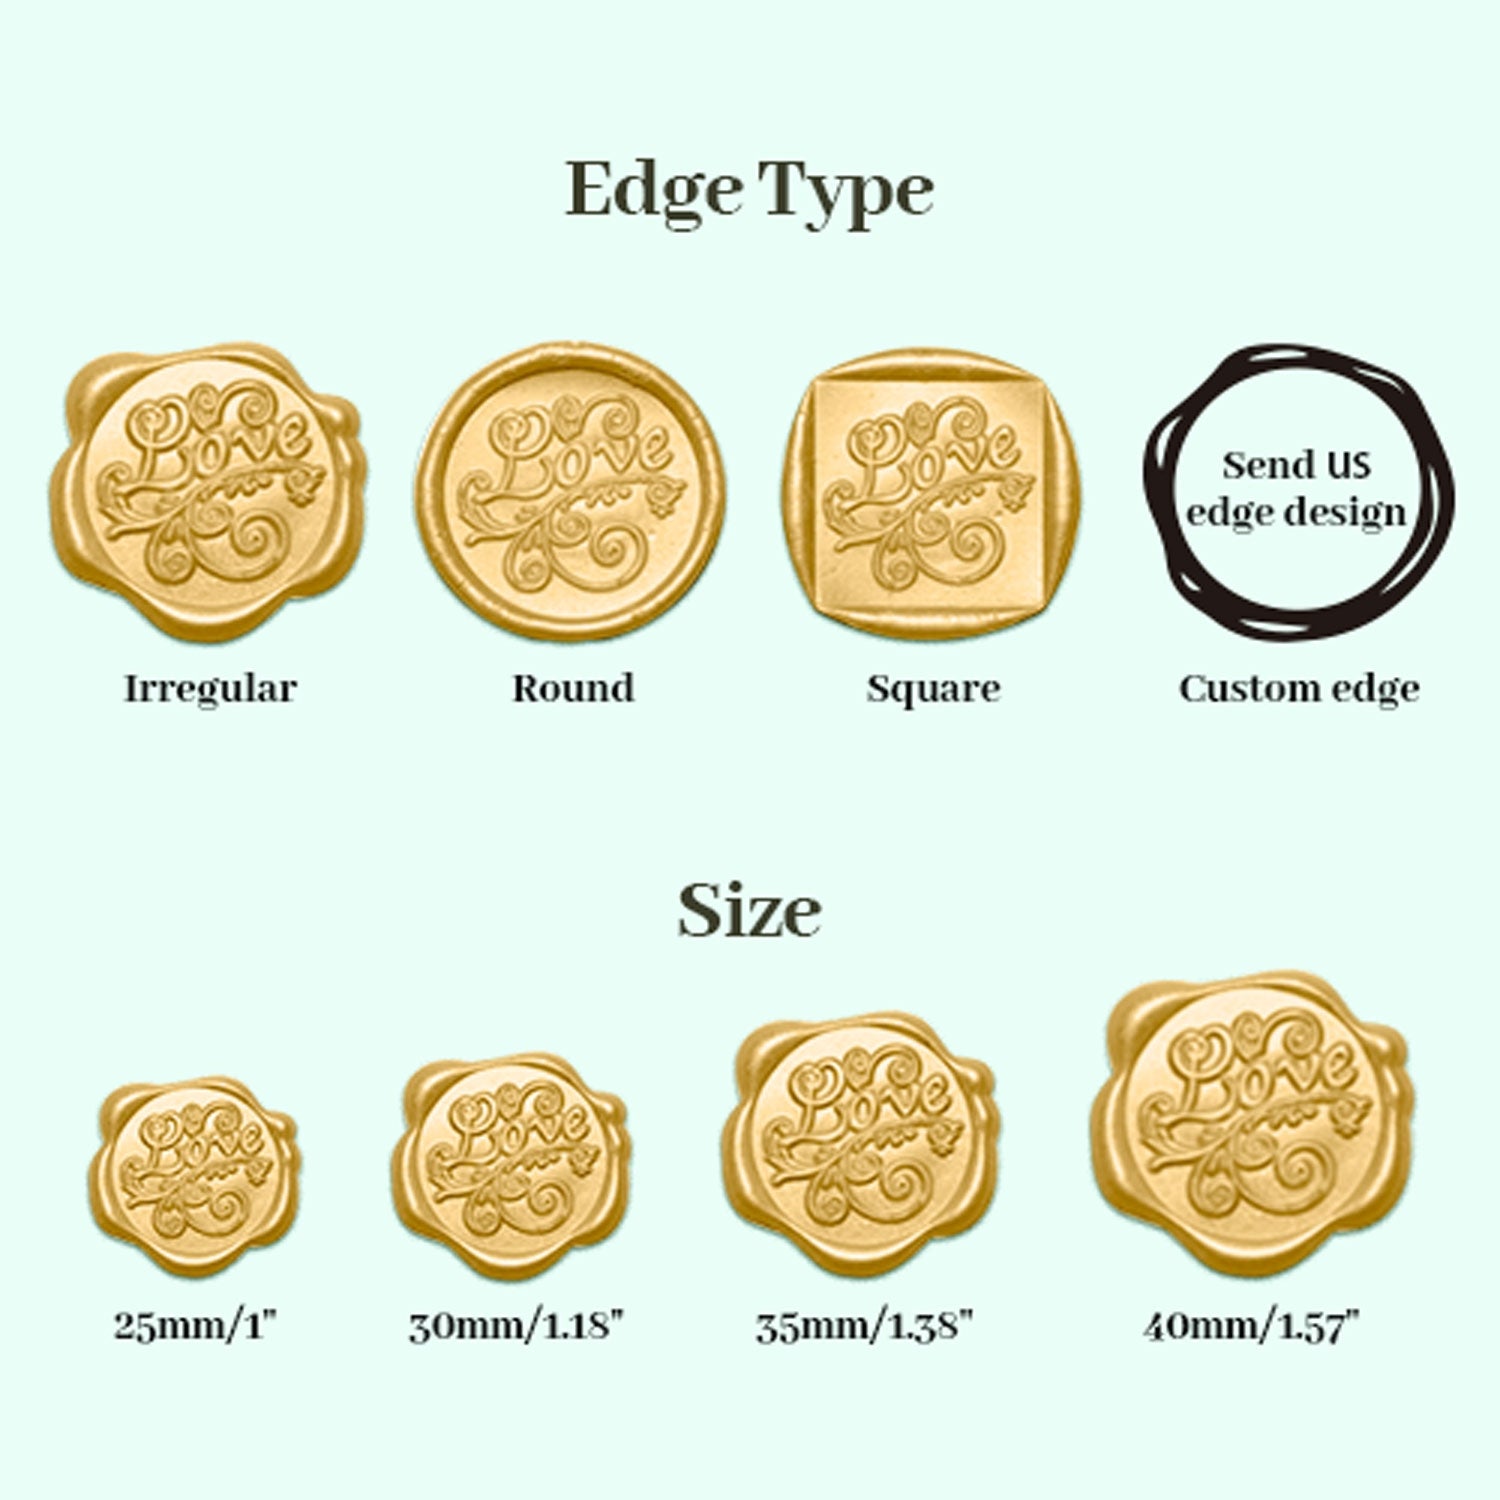  25 White & Gold Wax Seal Stickers - Wax Seals for Wedding  Envelope Seals - Wax Seal Stamp - Sealing Wax for Wedding Invitations -  Golden Seal for Bridal Postage Stamps - Wedding Postage Stamps